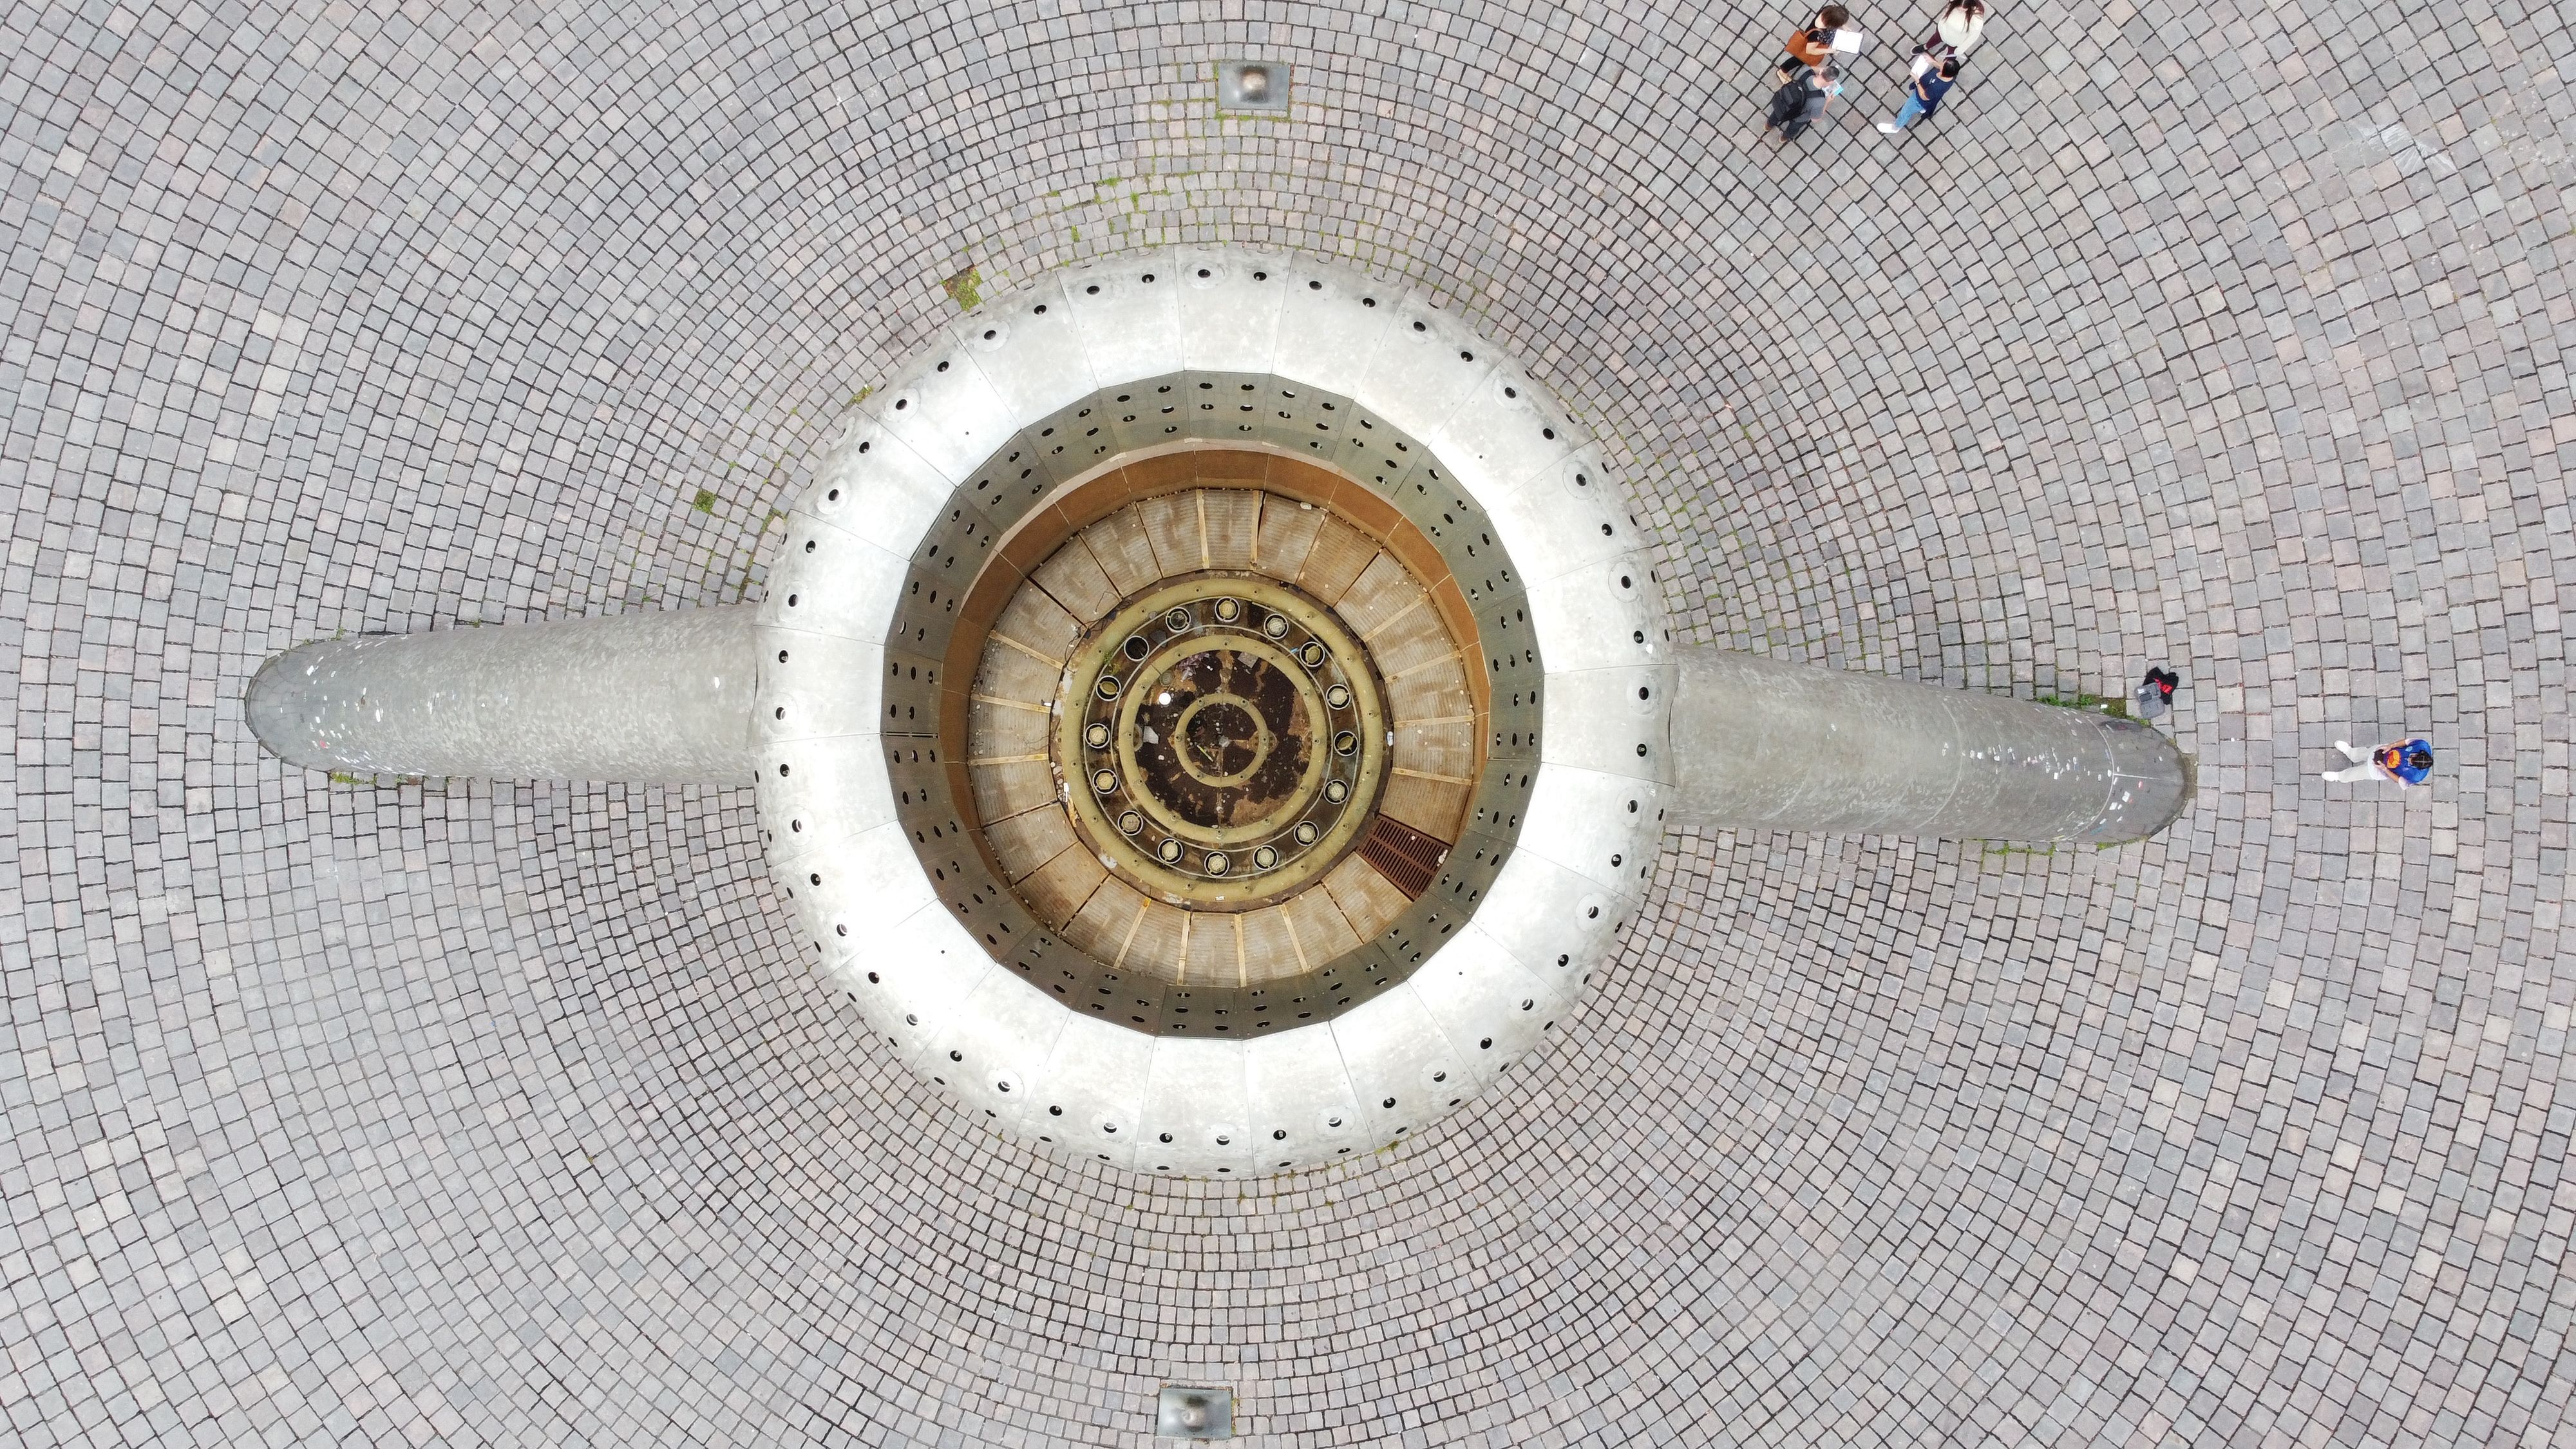 Hart Plaza fountain from directly above